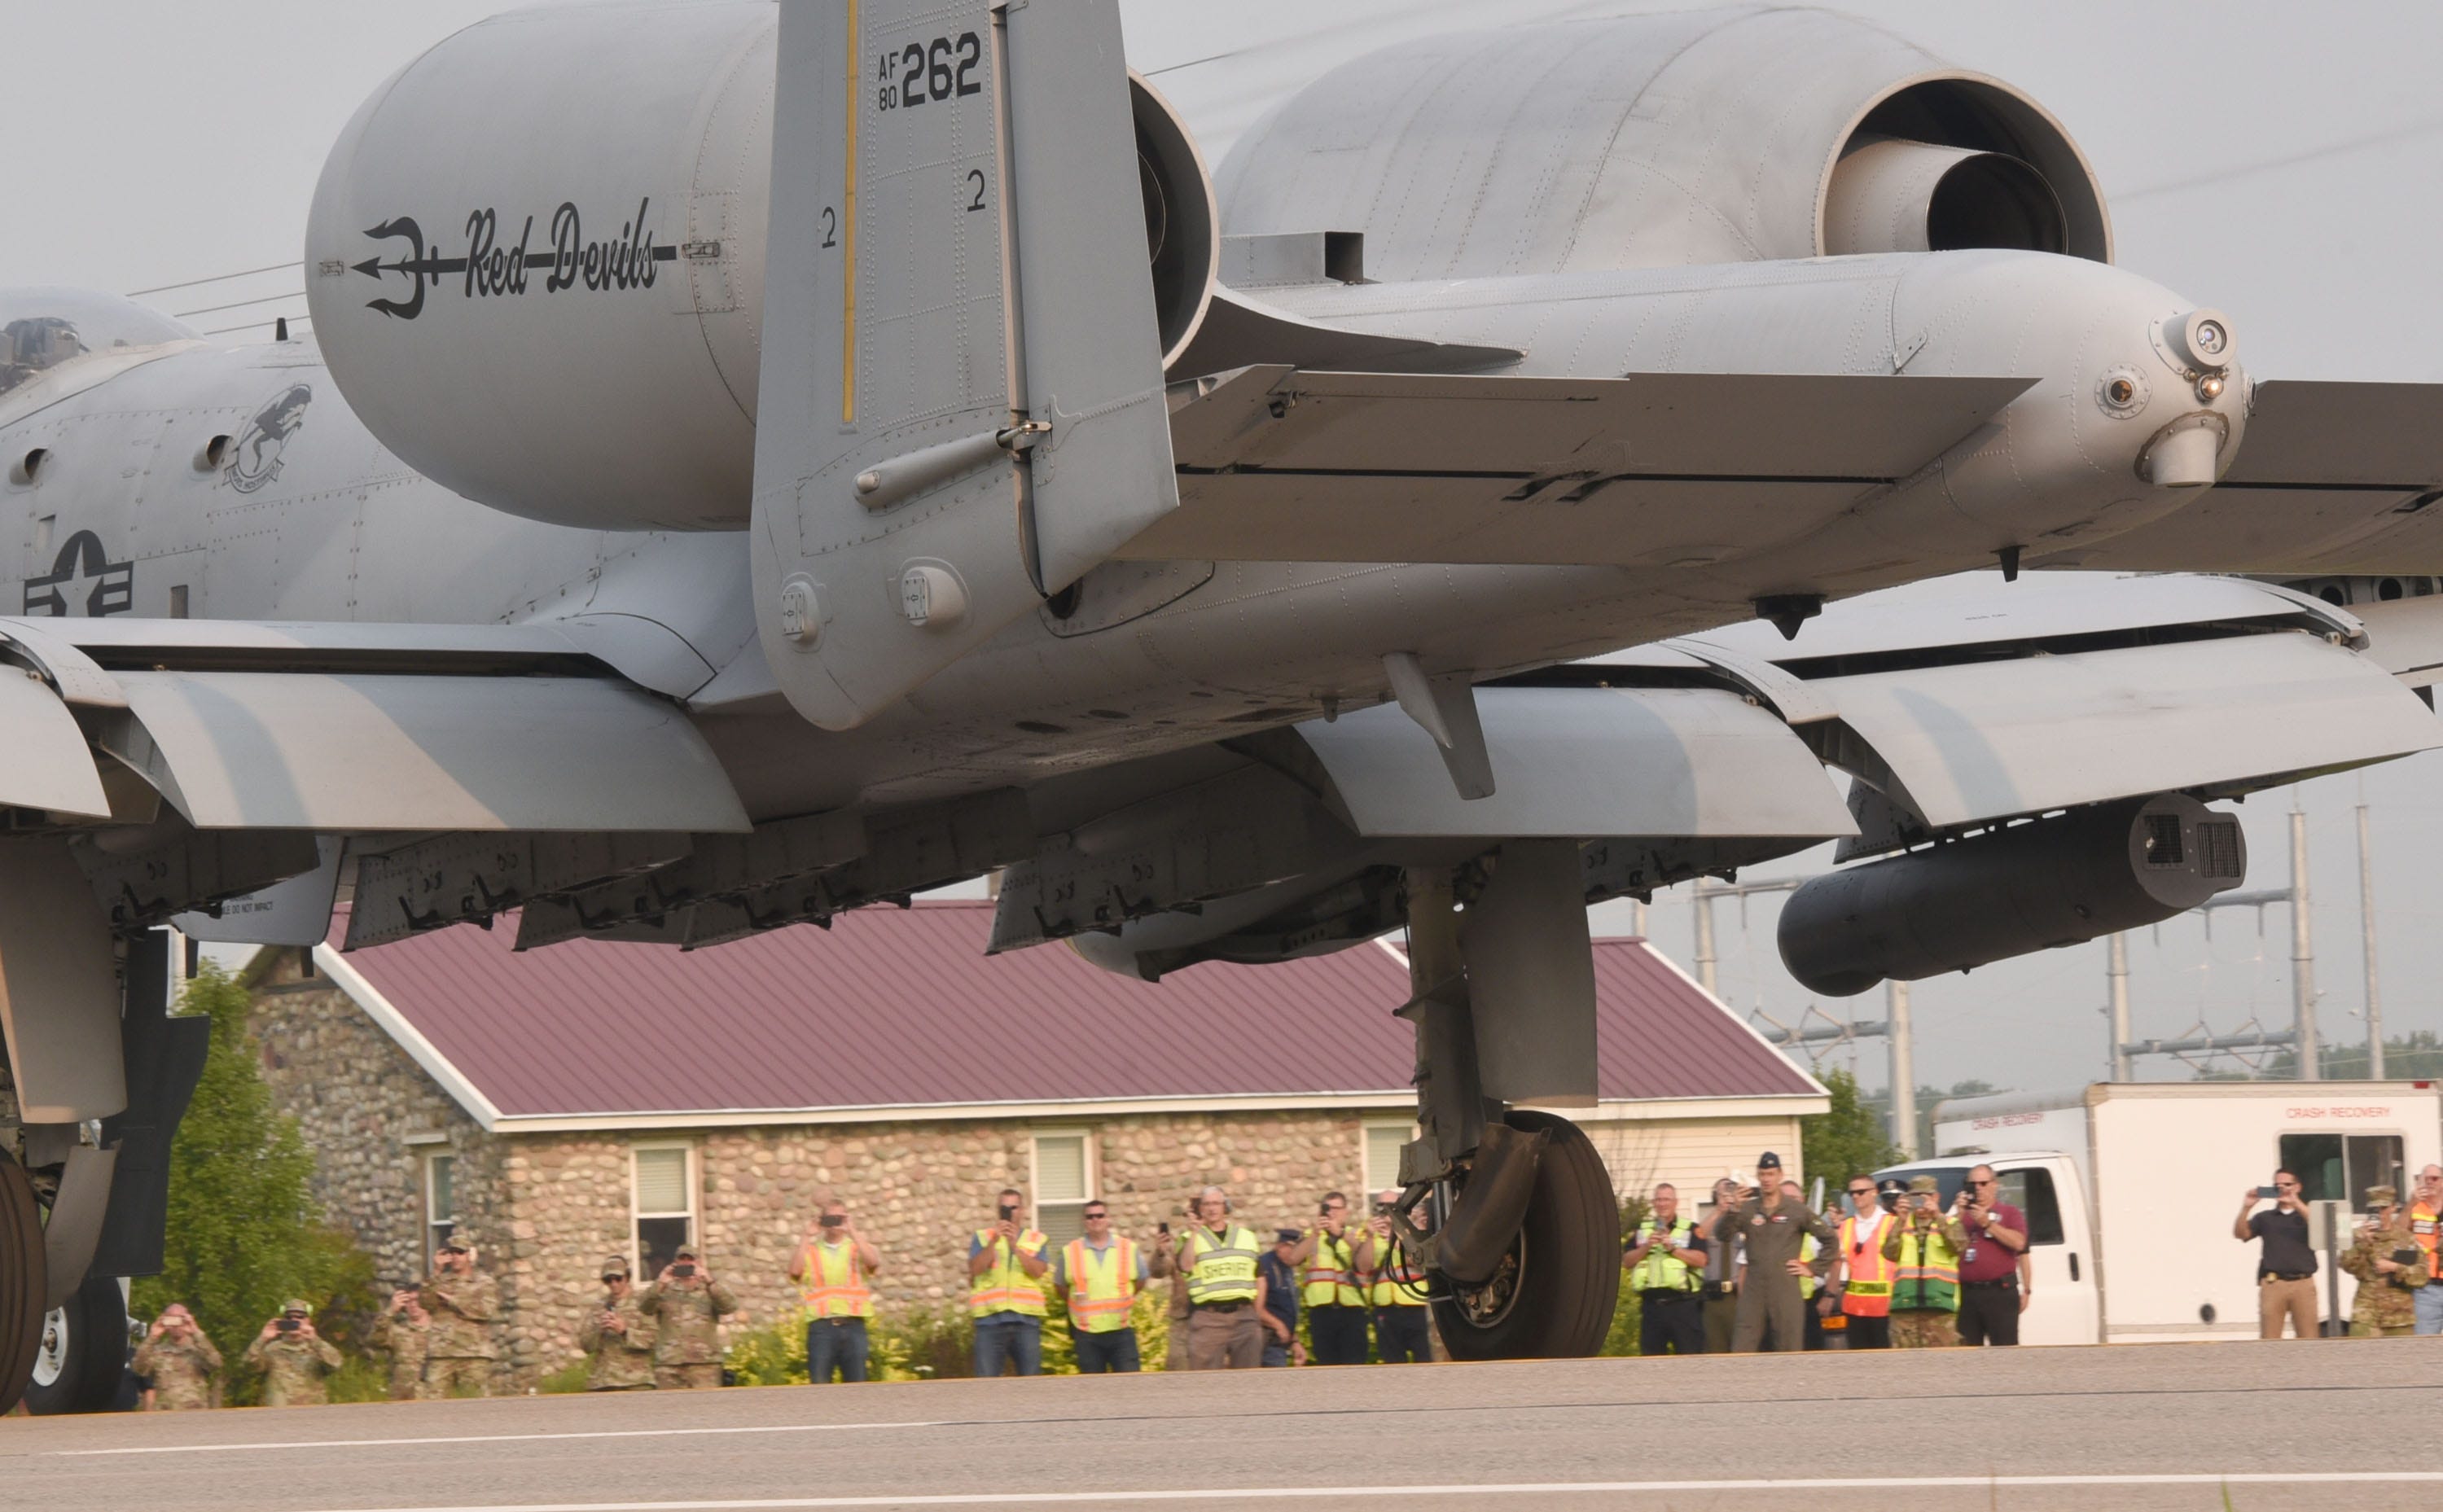 Rescue and military personnel view an A-10 Thunderbolt that had landed on highway M-32 west of Alpena Thursday, August 5, 2021. Part of a training exercise during Operation Northern Strike, four aircraft landed on the closed highway at part of a war-readiness event.